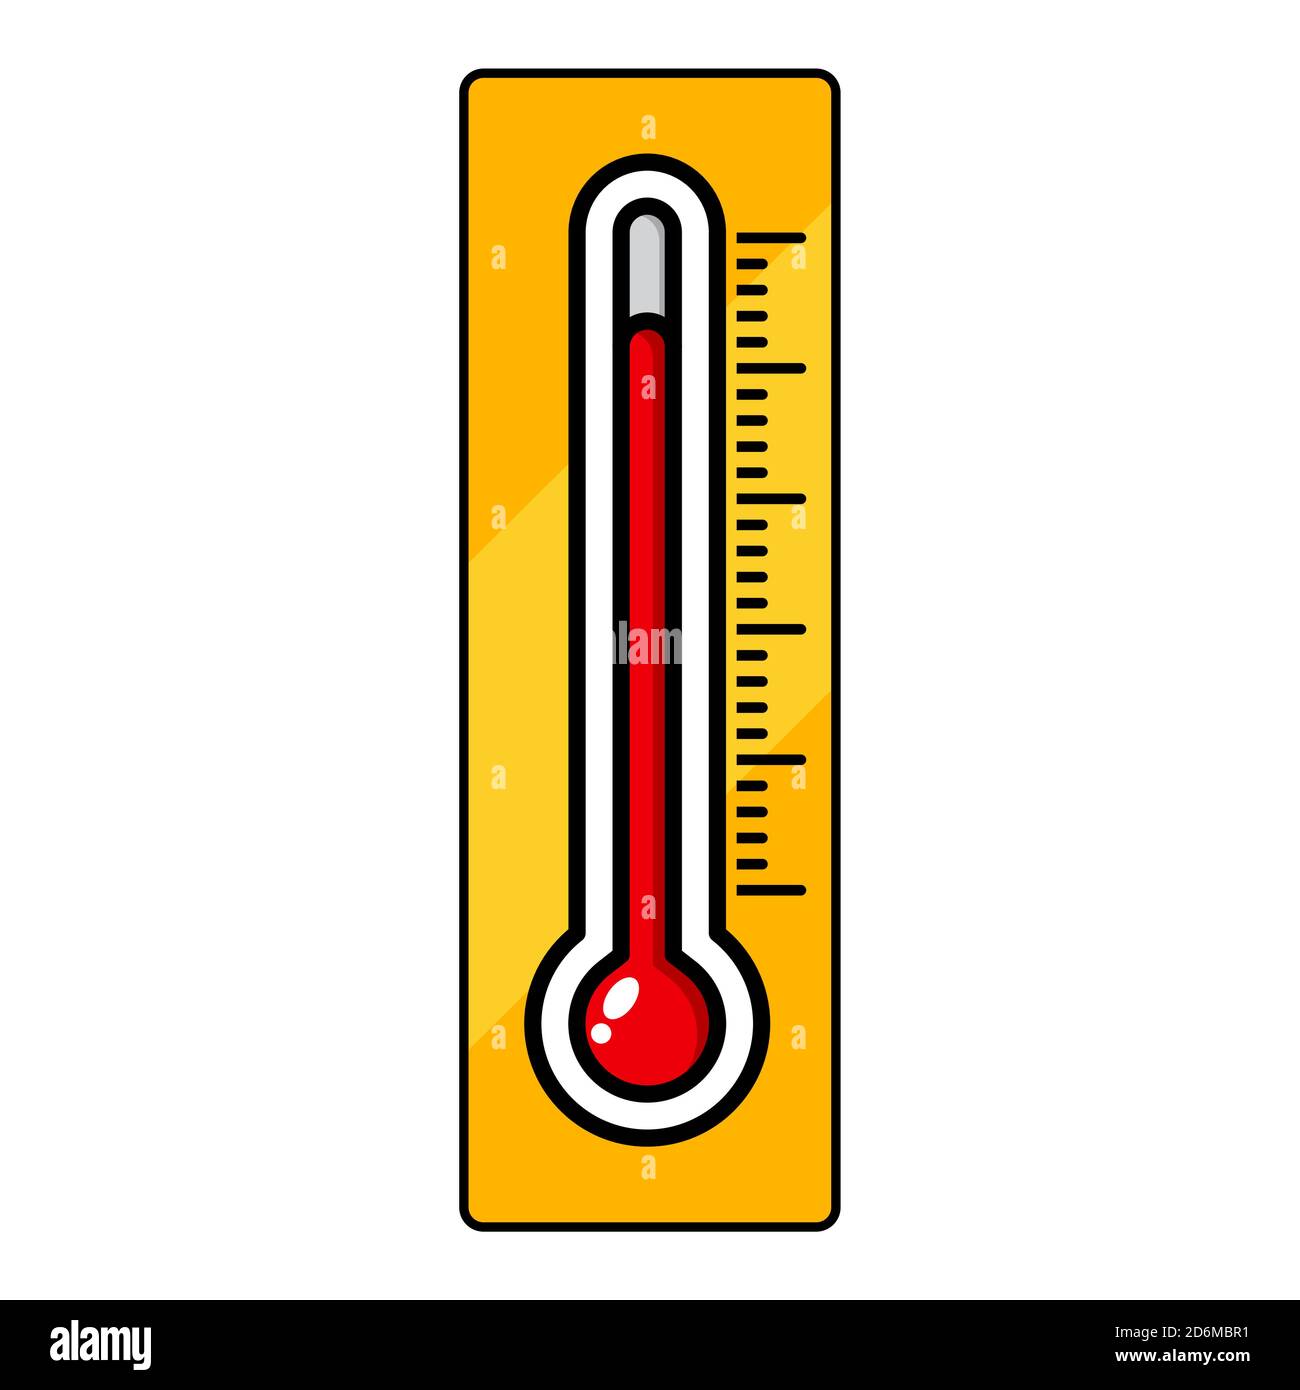 https://c8.alamy.com/comp/2D6MBR1/thermometer-clipart-illustration-isolated-on-white-autumnal-vector-design-temperature-measurement-autumn-symbol-weather-measuring-indicator-icon-w-2D6MBR1.jpg